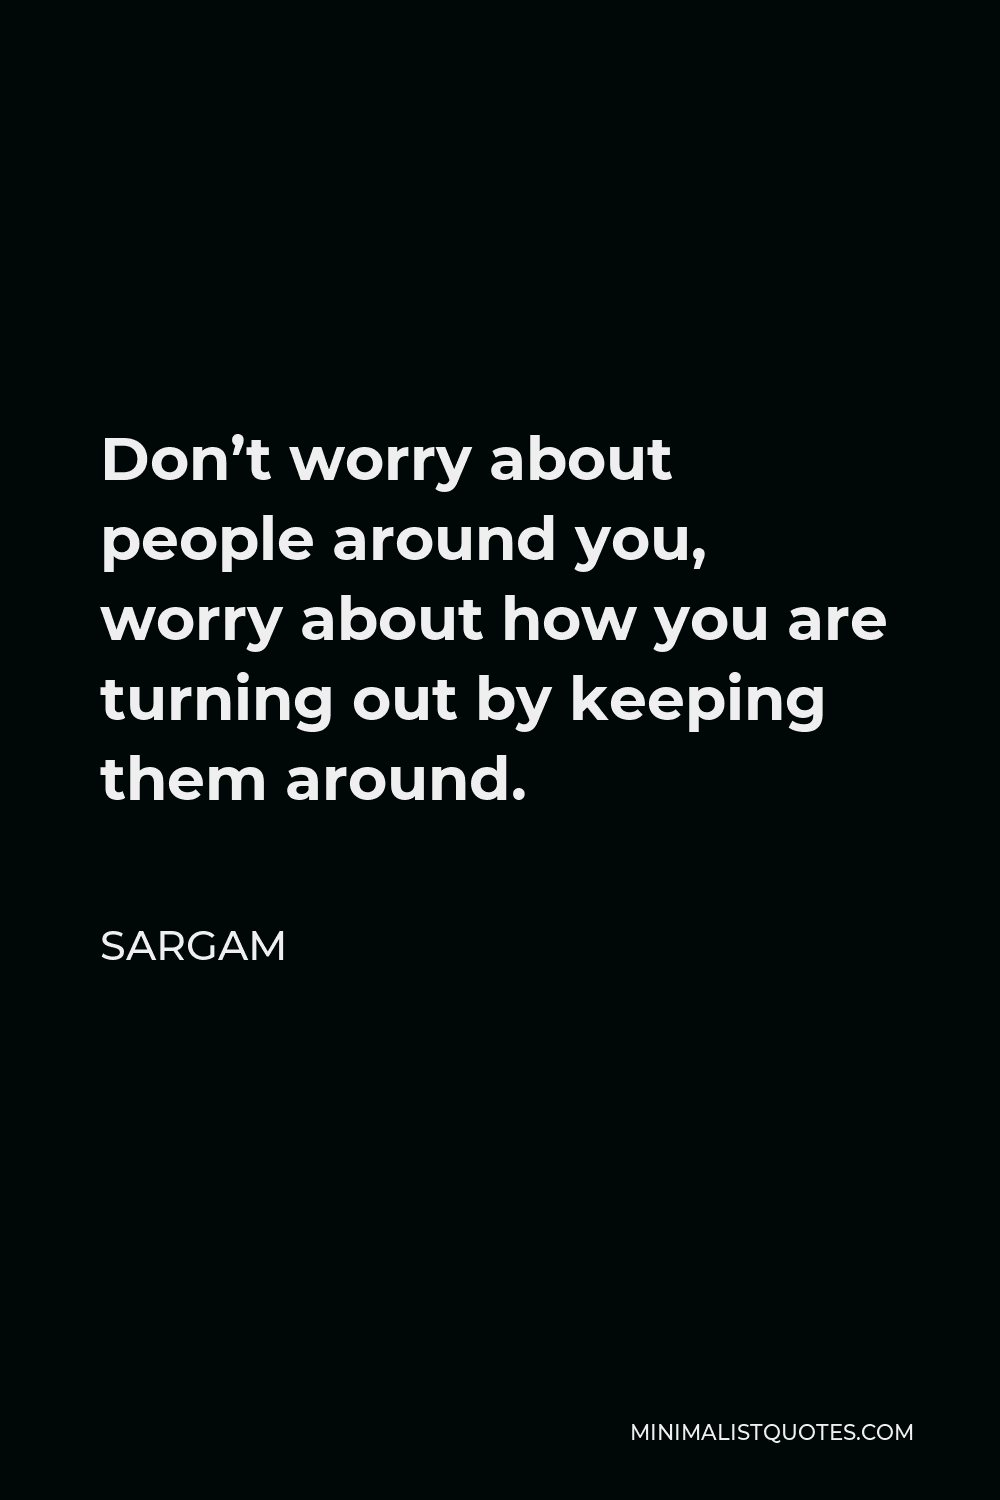 Sargam Quote - Don’t worry about people around you, worry about how you are turning out by keeping them around.